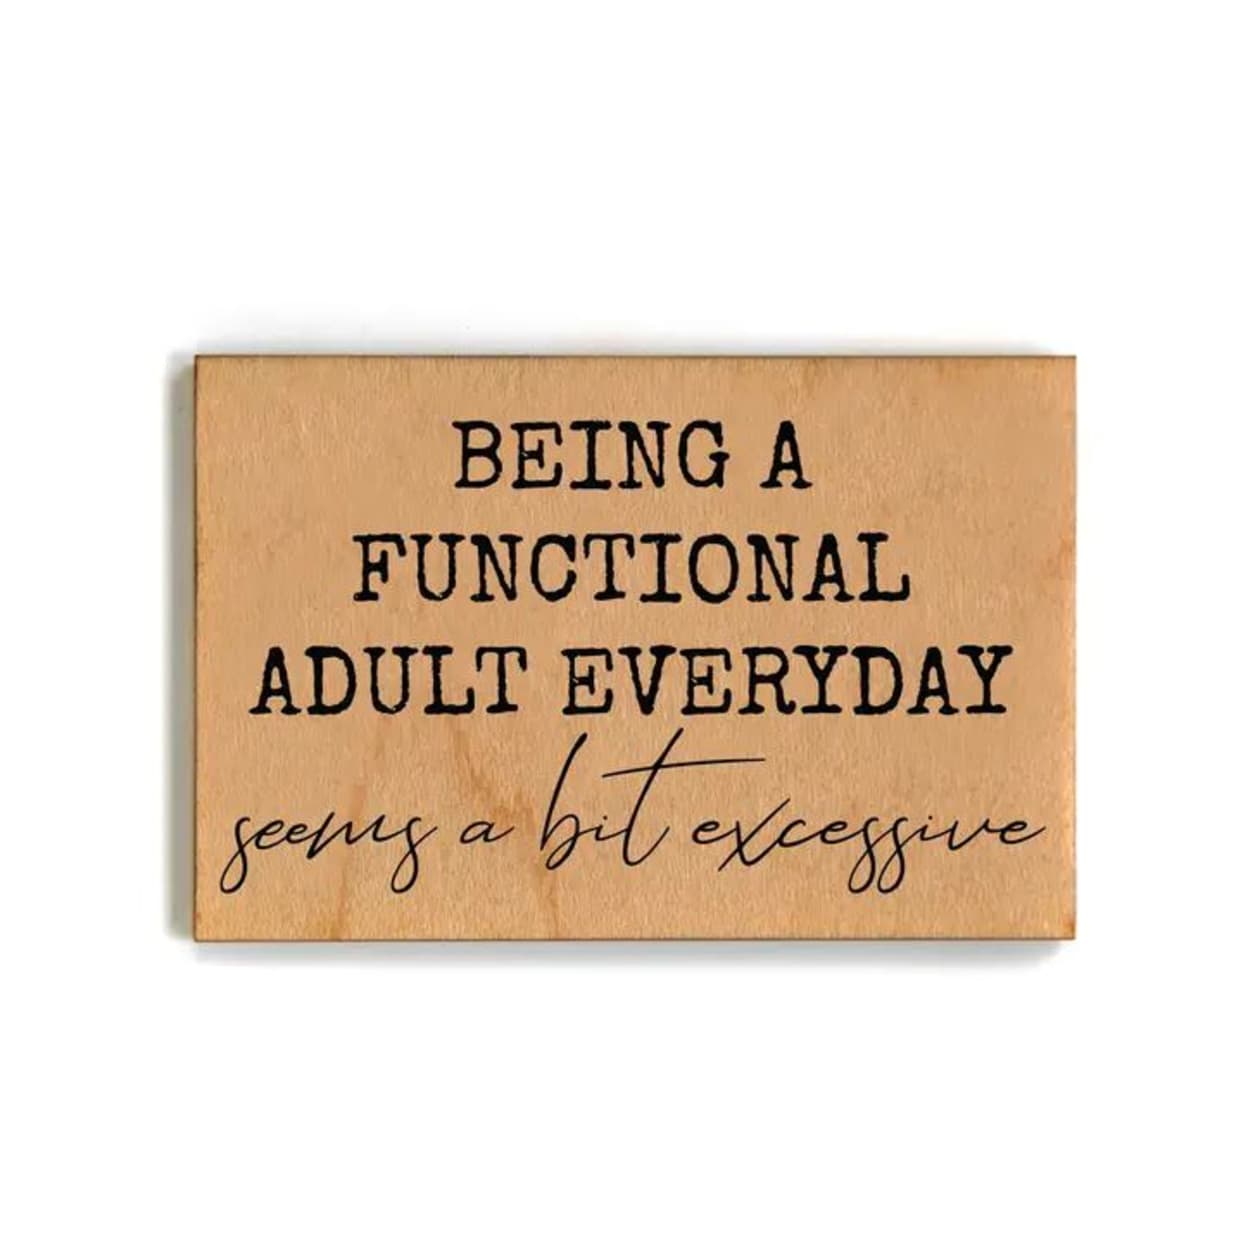 Being a Functional Adult Everyday Is a Bit Excessive Refrigerator Wood Magnets | 2" x 3"